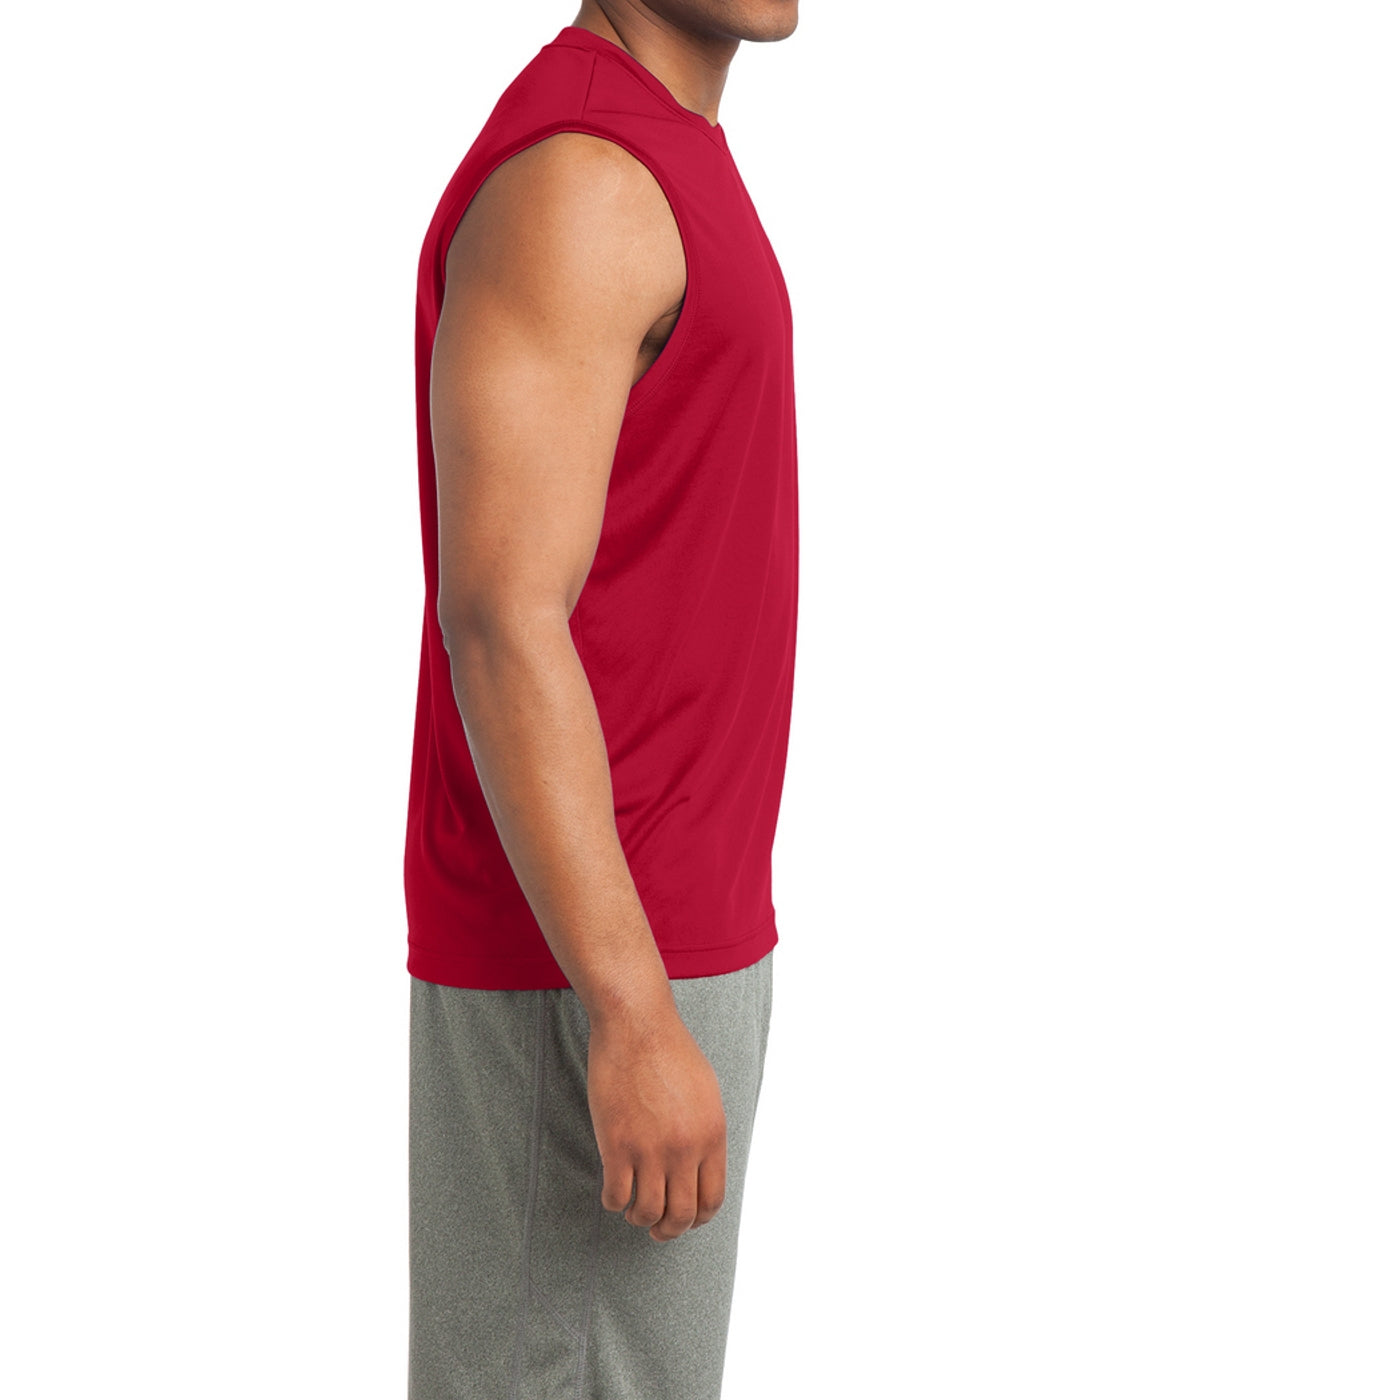 Sleeveless PosiCharge Competitor Tee - True Red